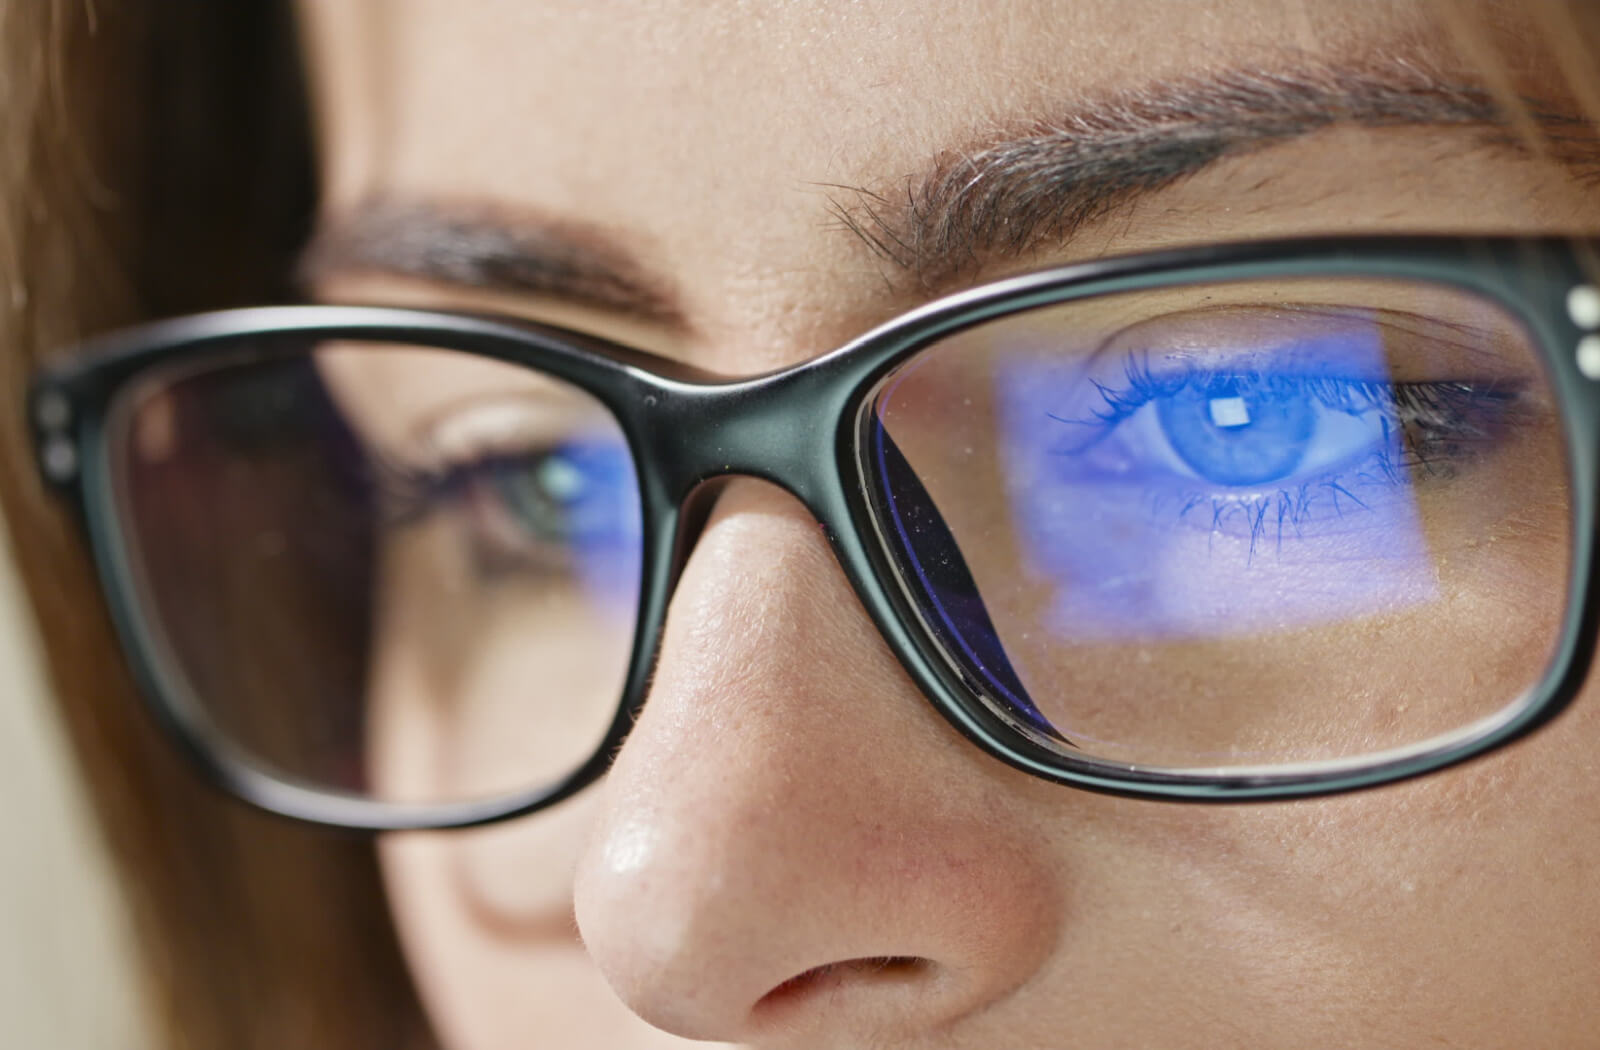 A close-up shot captures a young woman wearing computer glasses, with the computer screen reflecting in her eyewear.